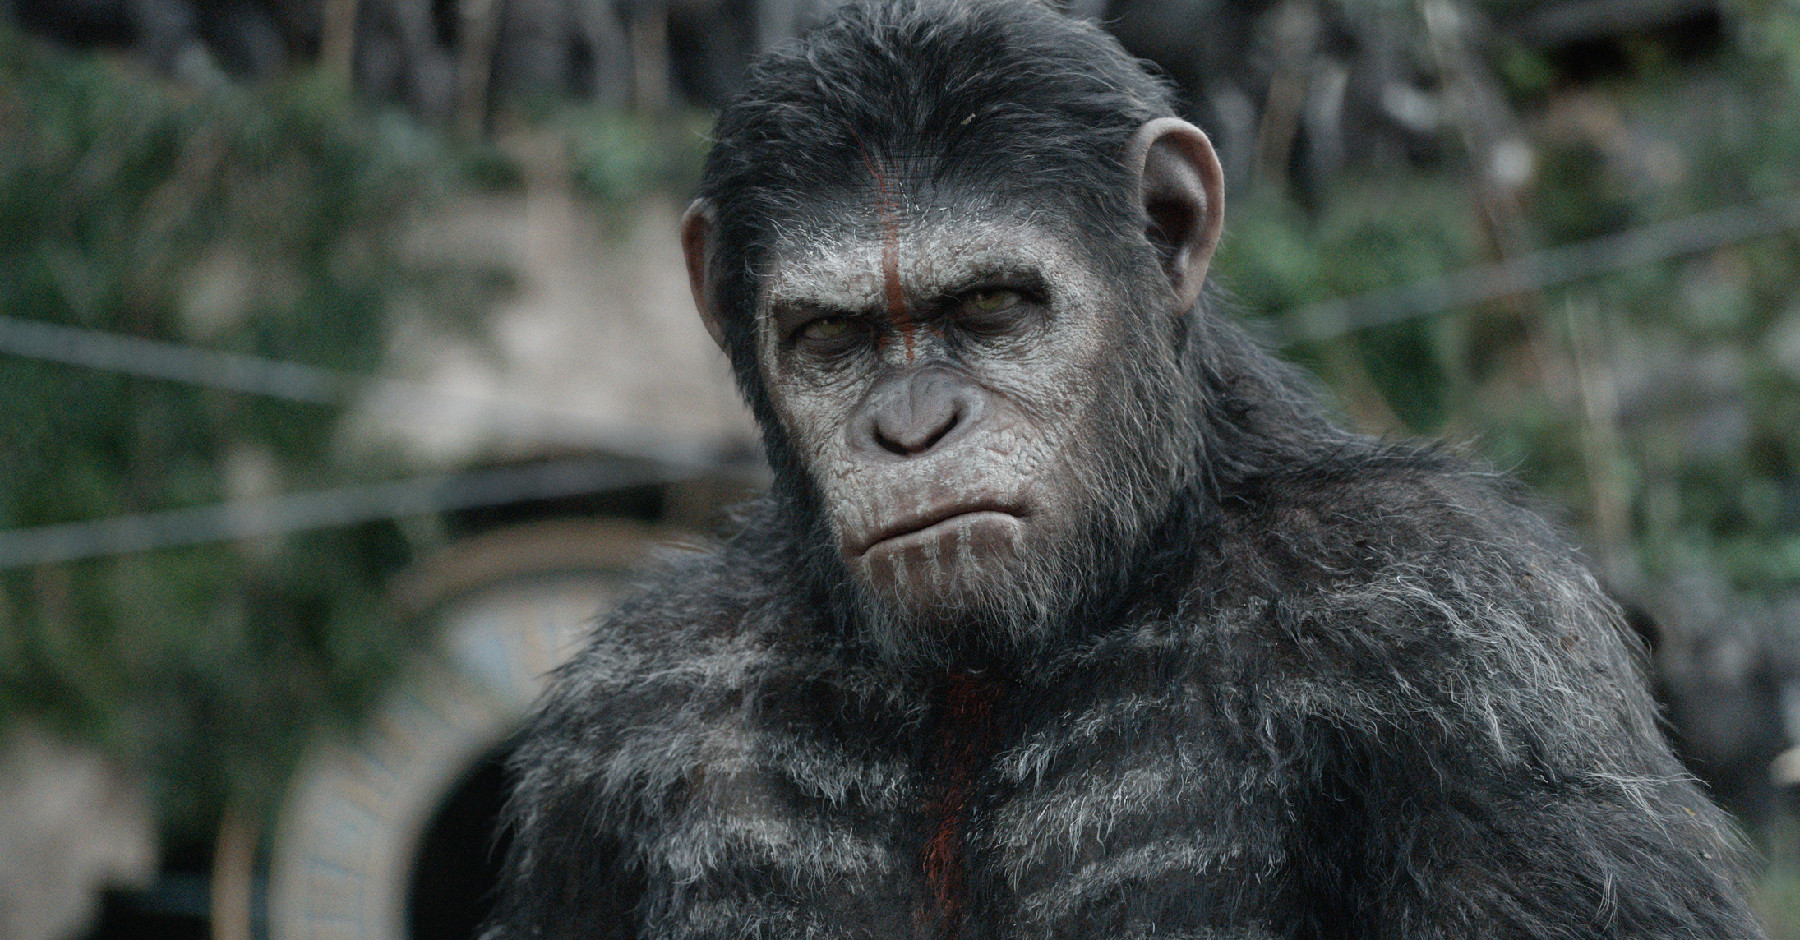 New Planet Of The Apes Movie Coming From Maze Runner Director